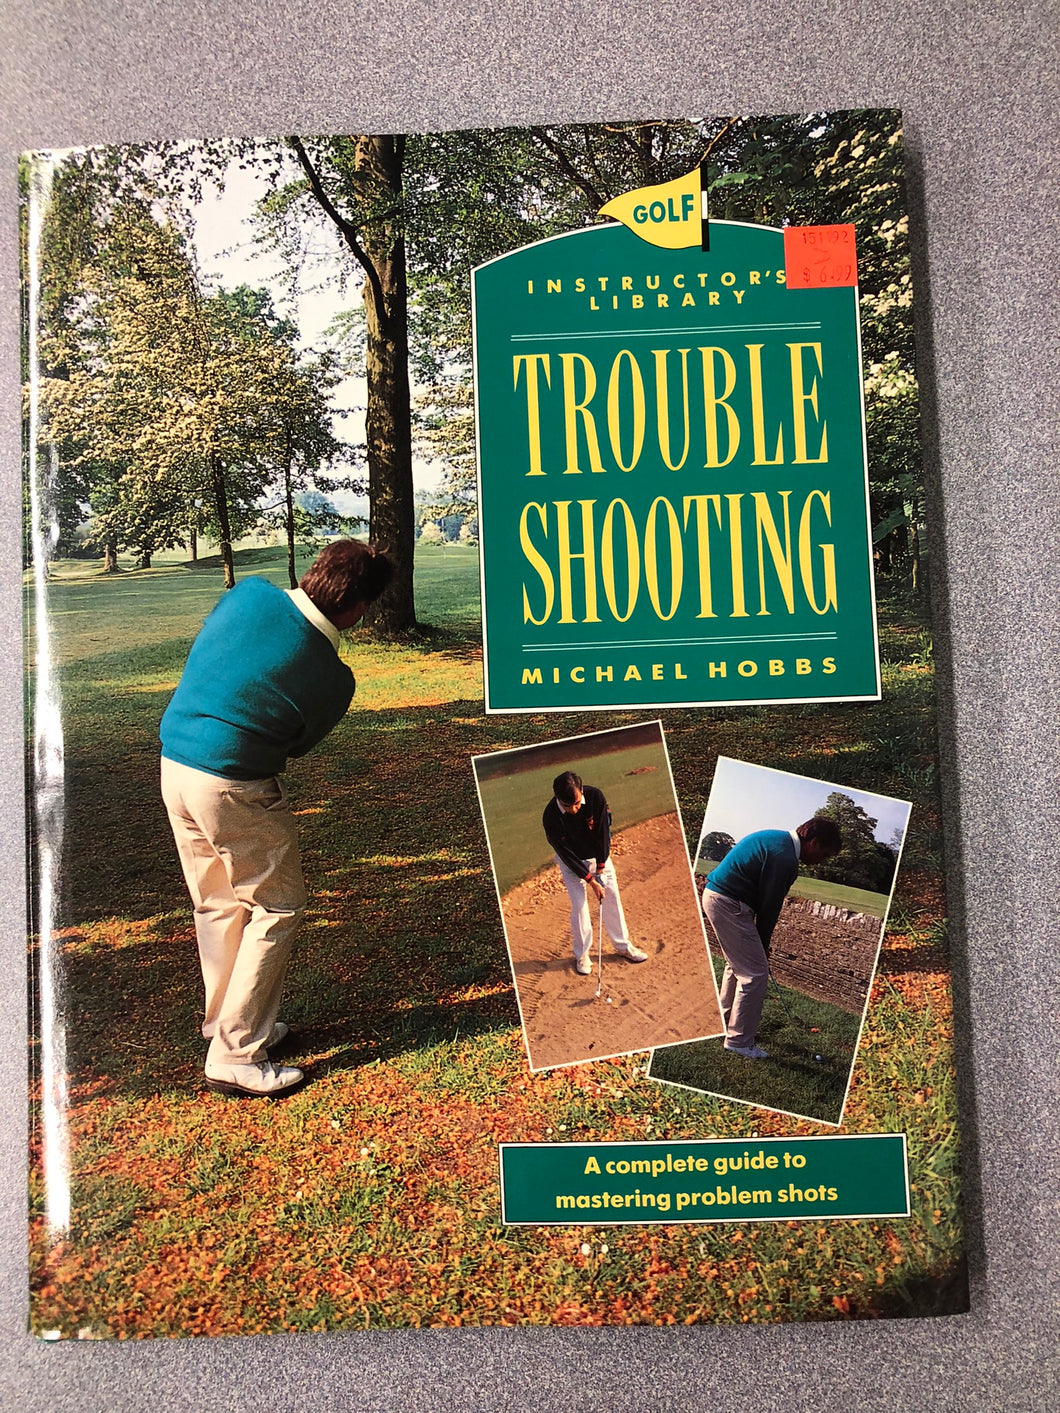 Golf Instructor's Library: Trouble Shooting: a Complete Guide to Mastering Problem Shots, Hobbs, Michael [1991] OU 7/22